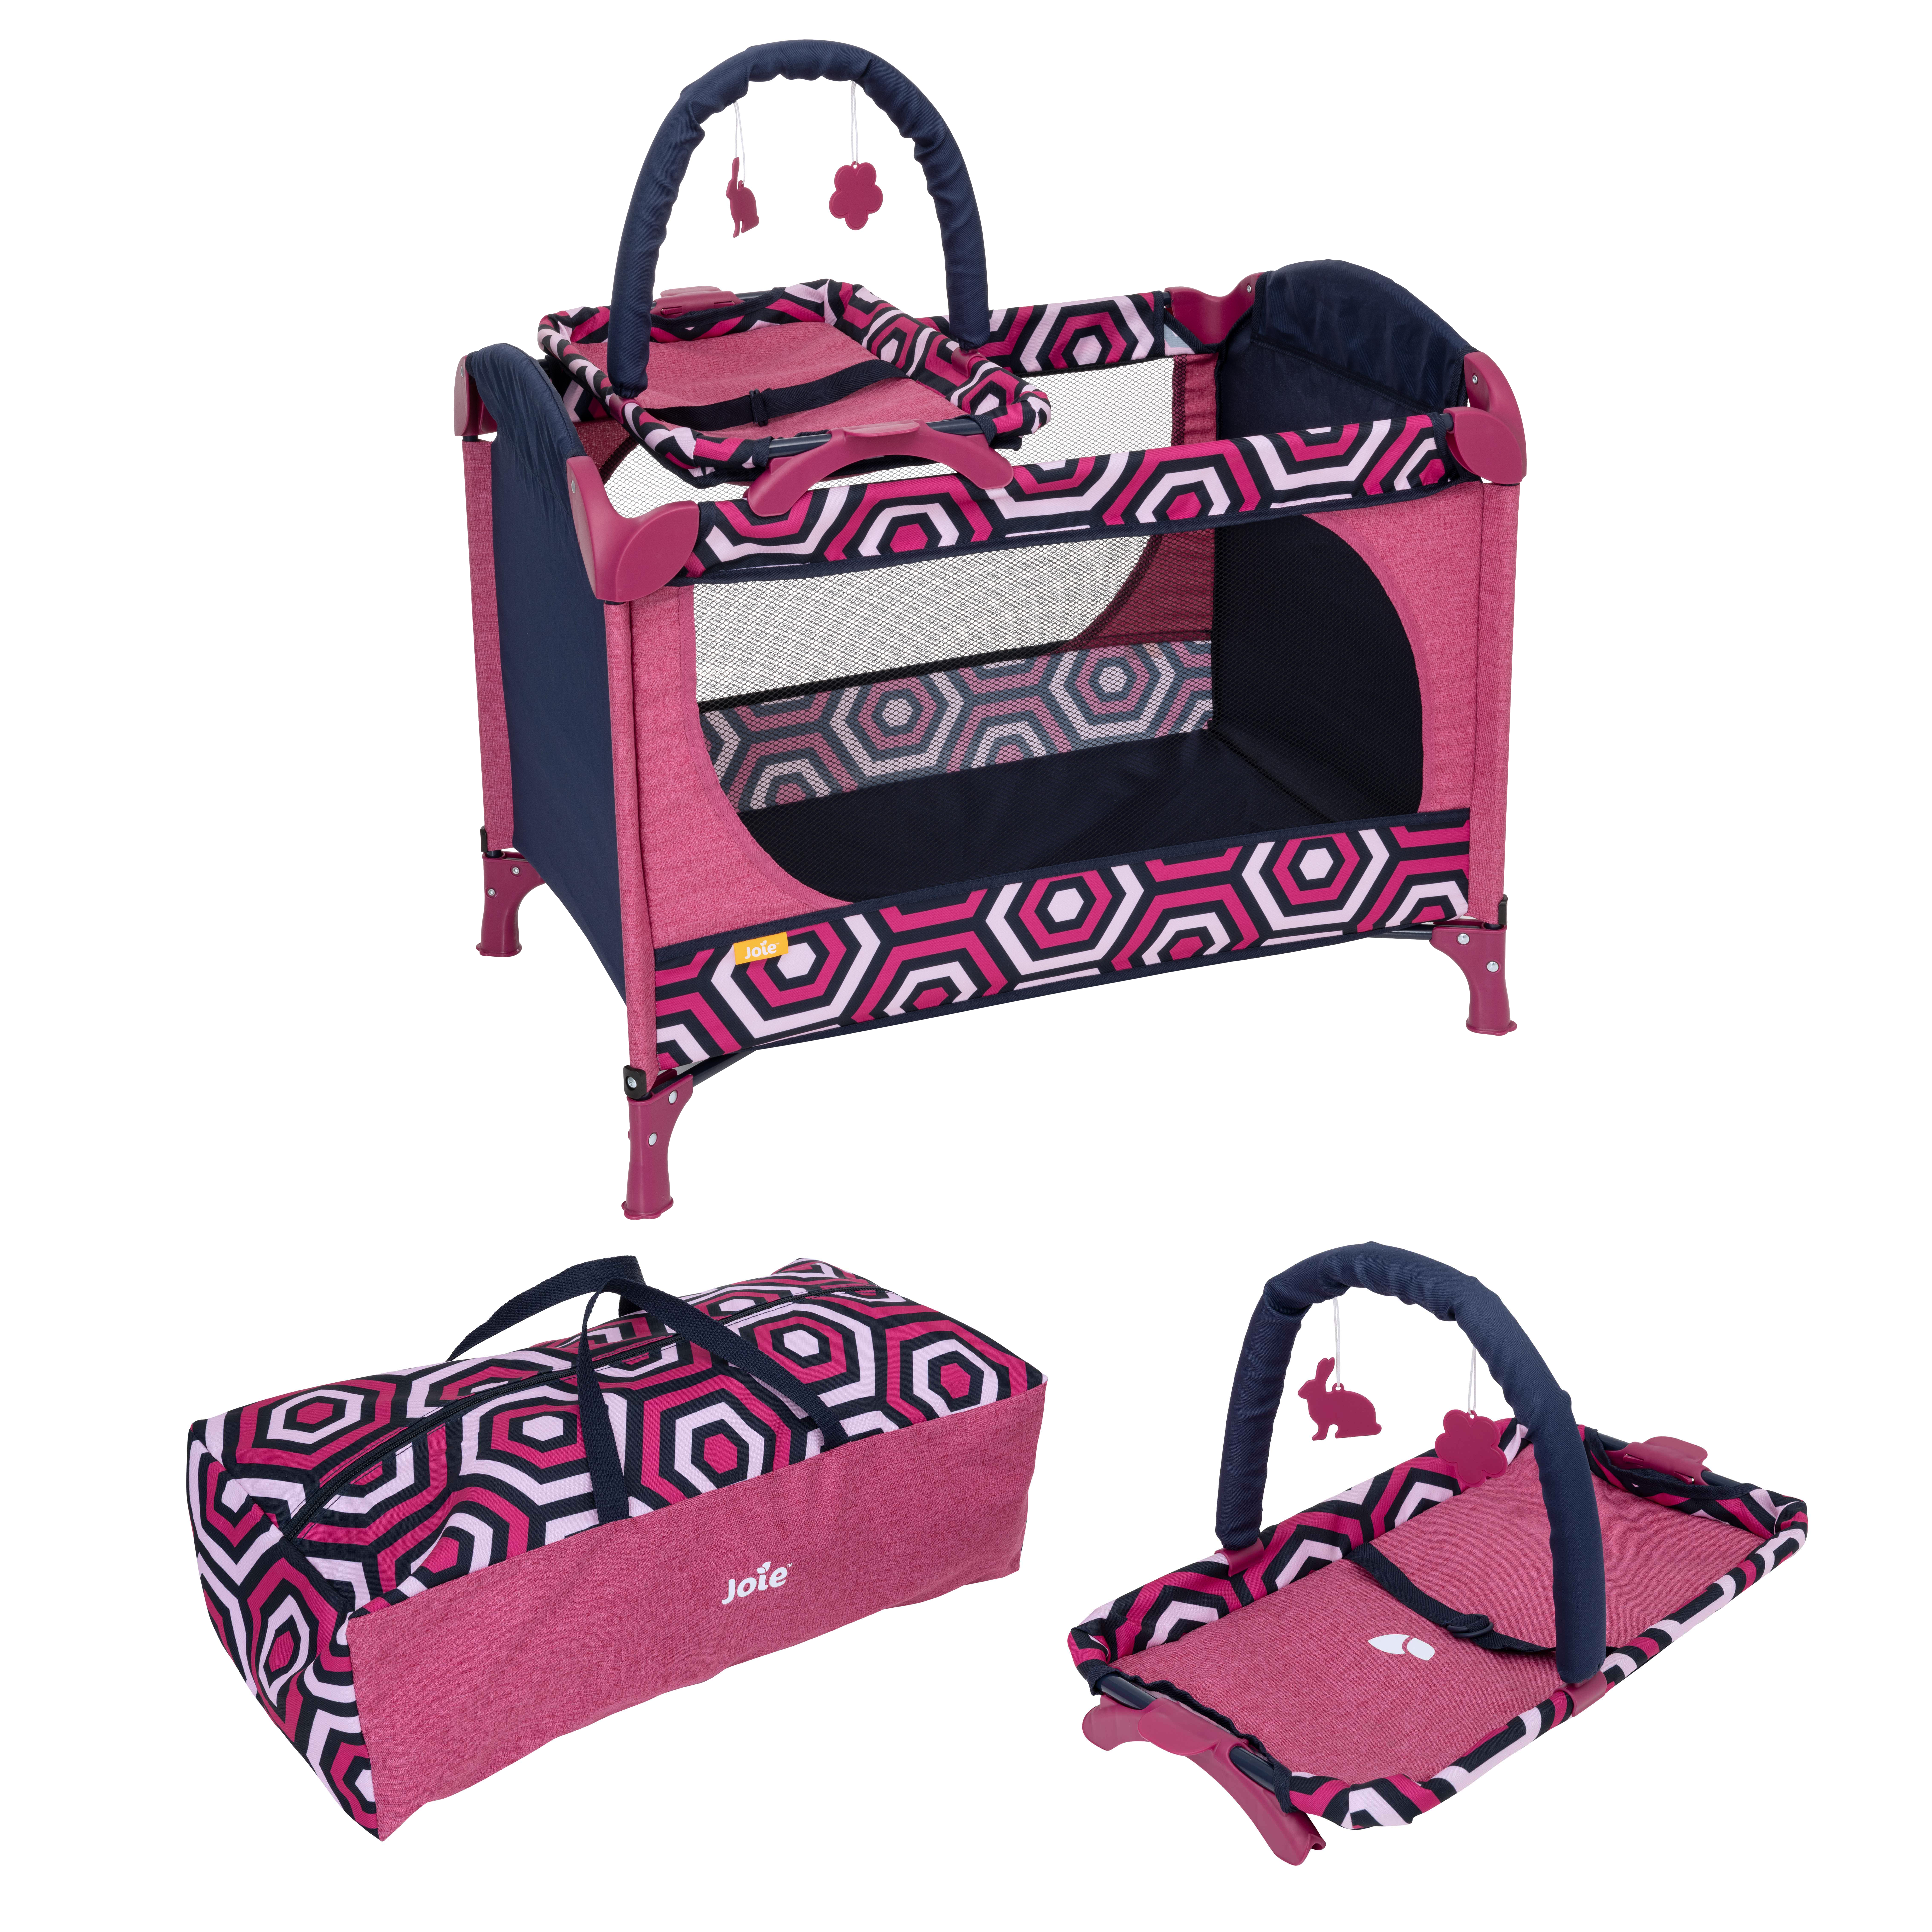 The Joie 3in1 Junior Dolls Excursion Travel Cot - Pink (3 - 6 Years)